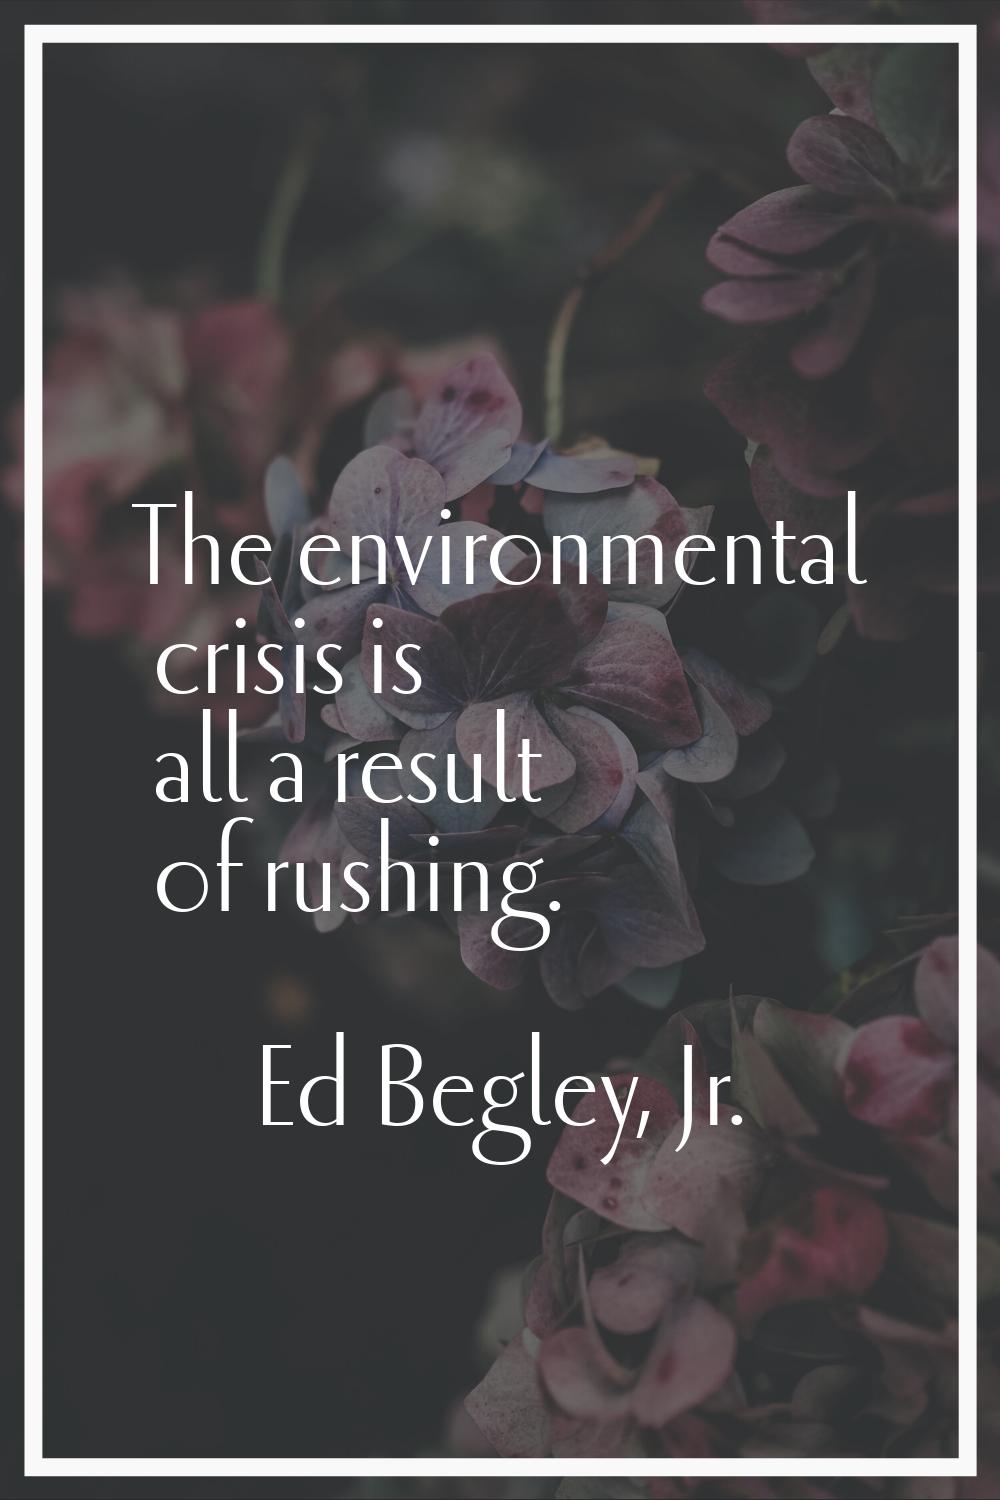 The environmental crisis is all a result of rushing.